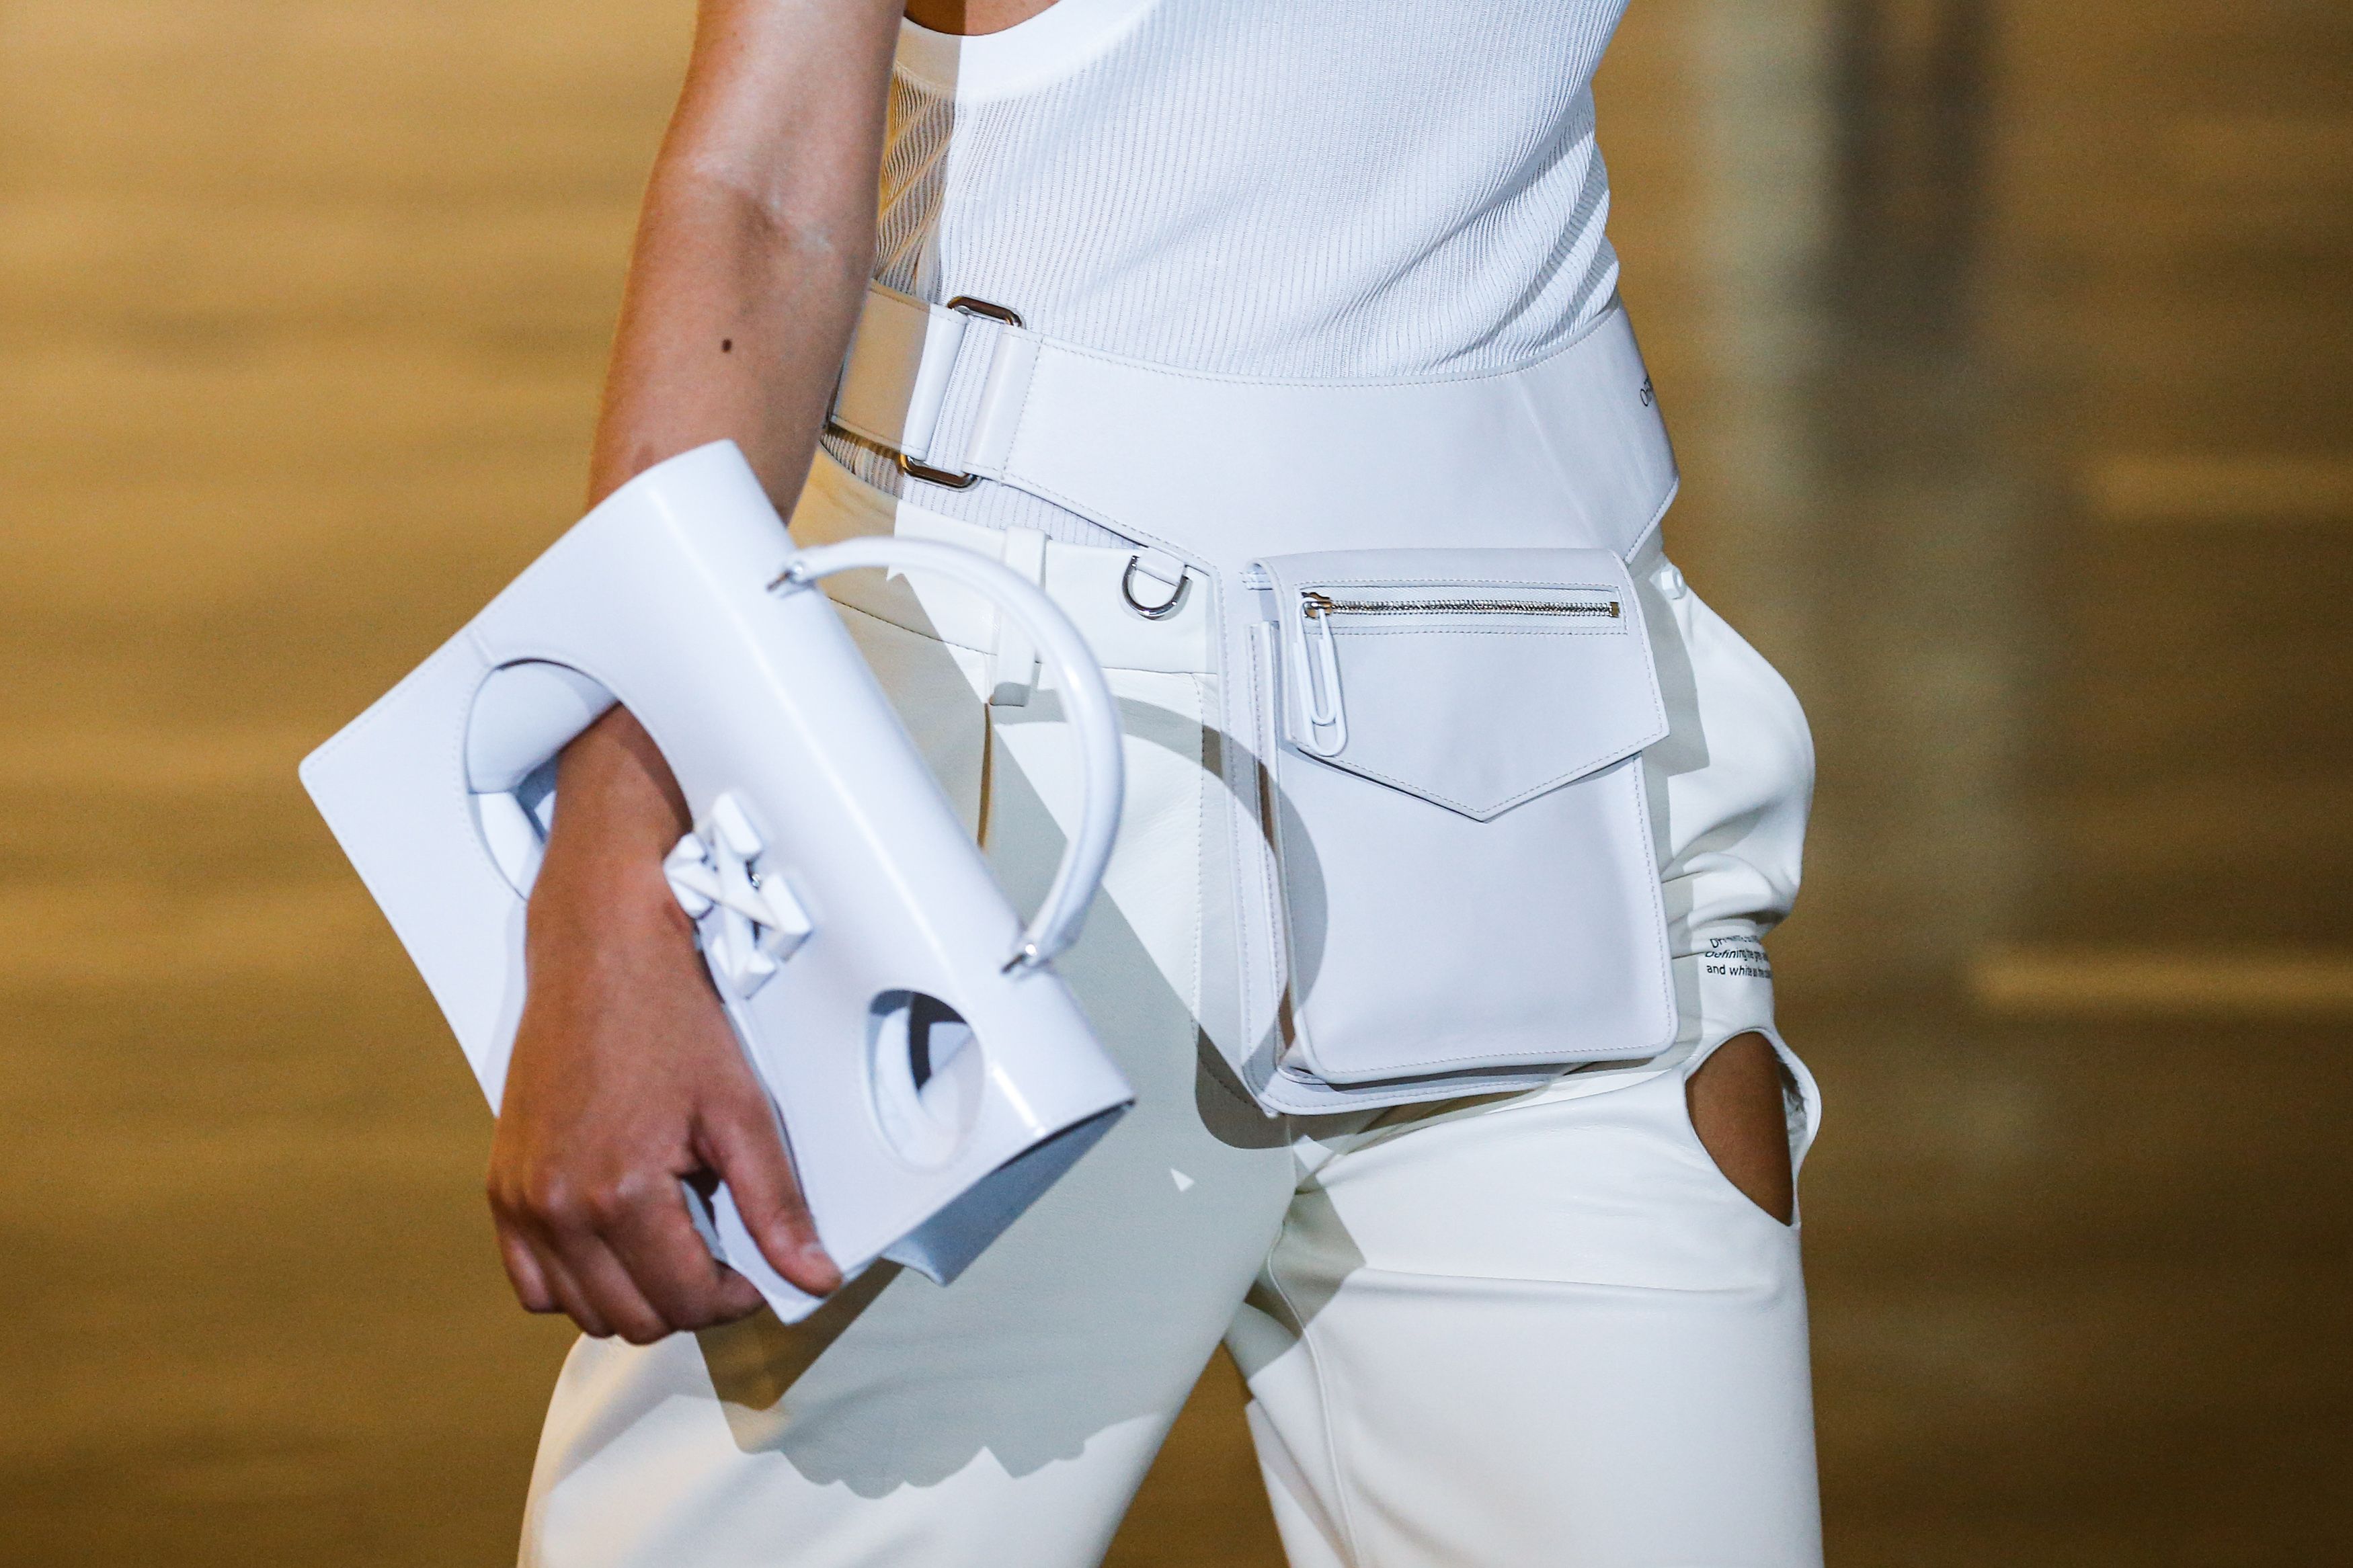 INTRODUCING: BAGS BY OFFWHITE, ISSEY MIYAKE & MORE FOR HER